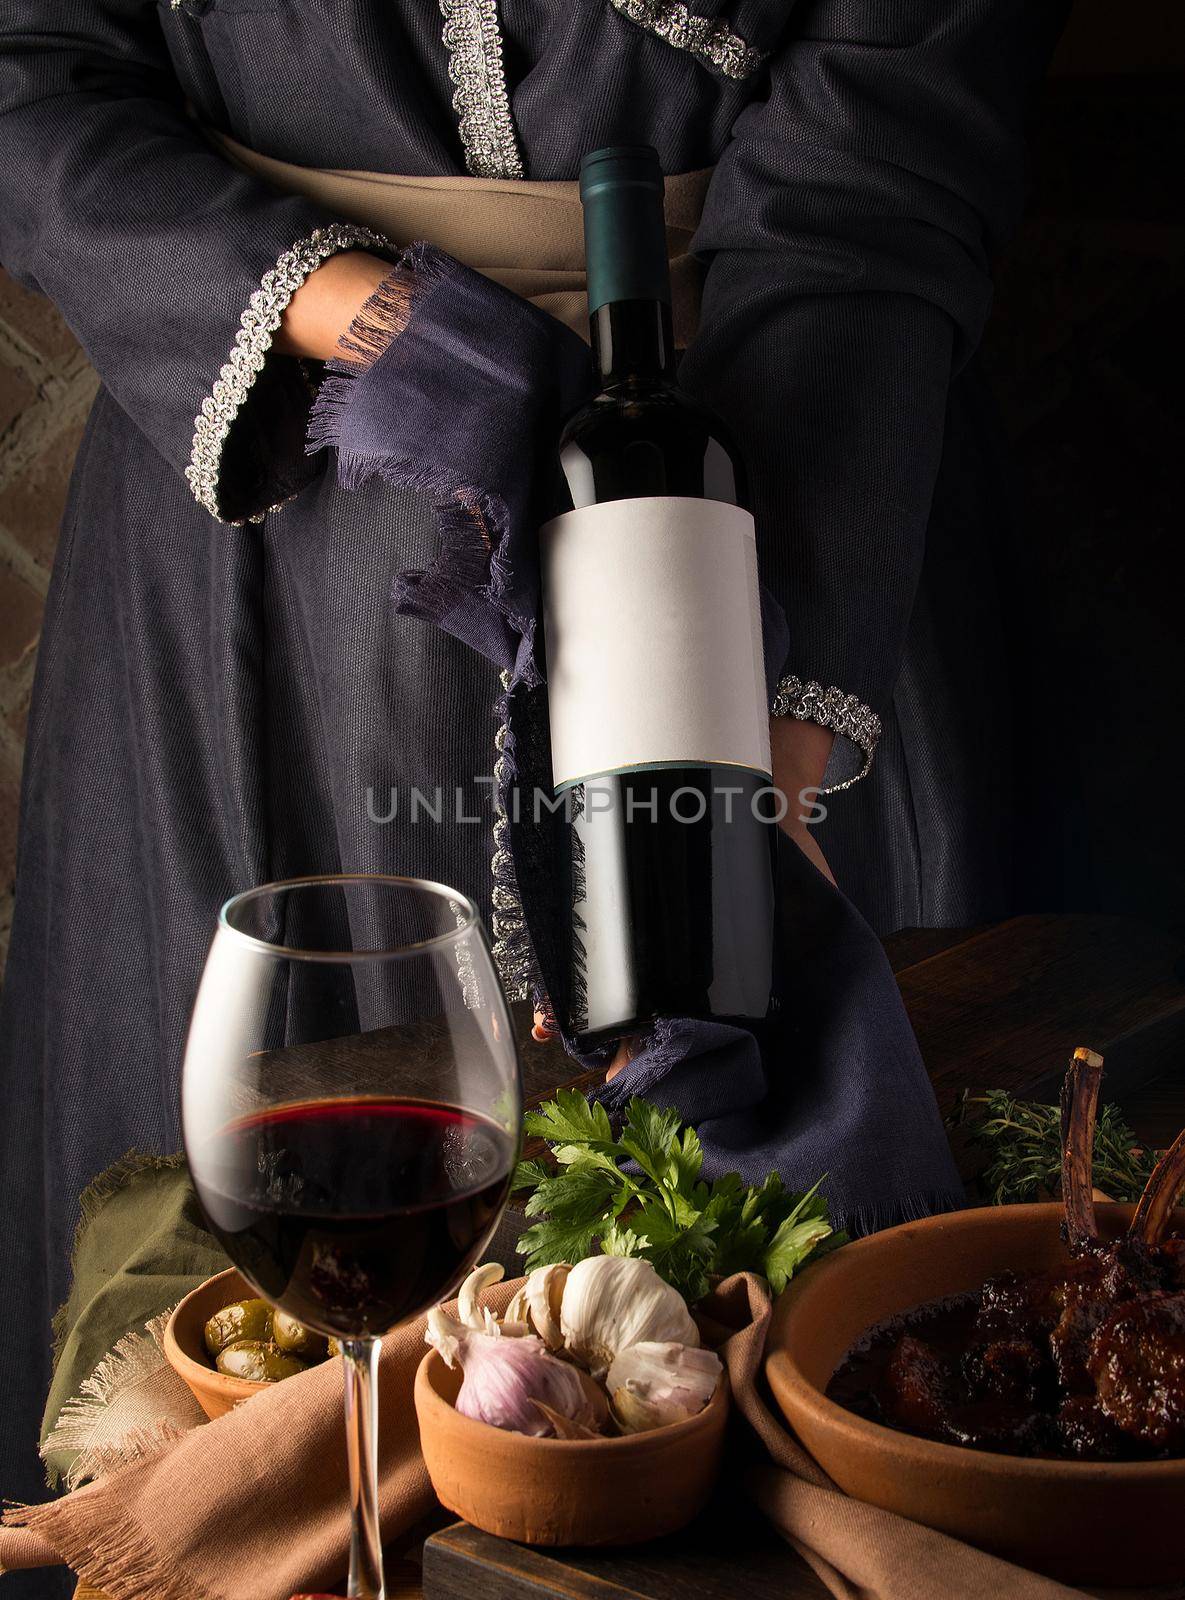 Vertical shot of a person in a traditional costume showing a wine bottle by A_Karim